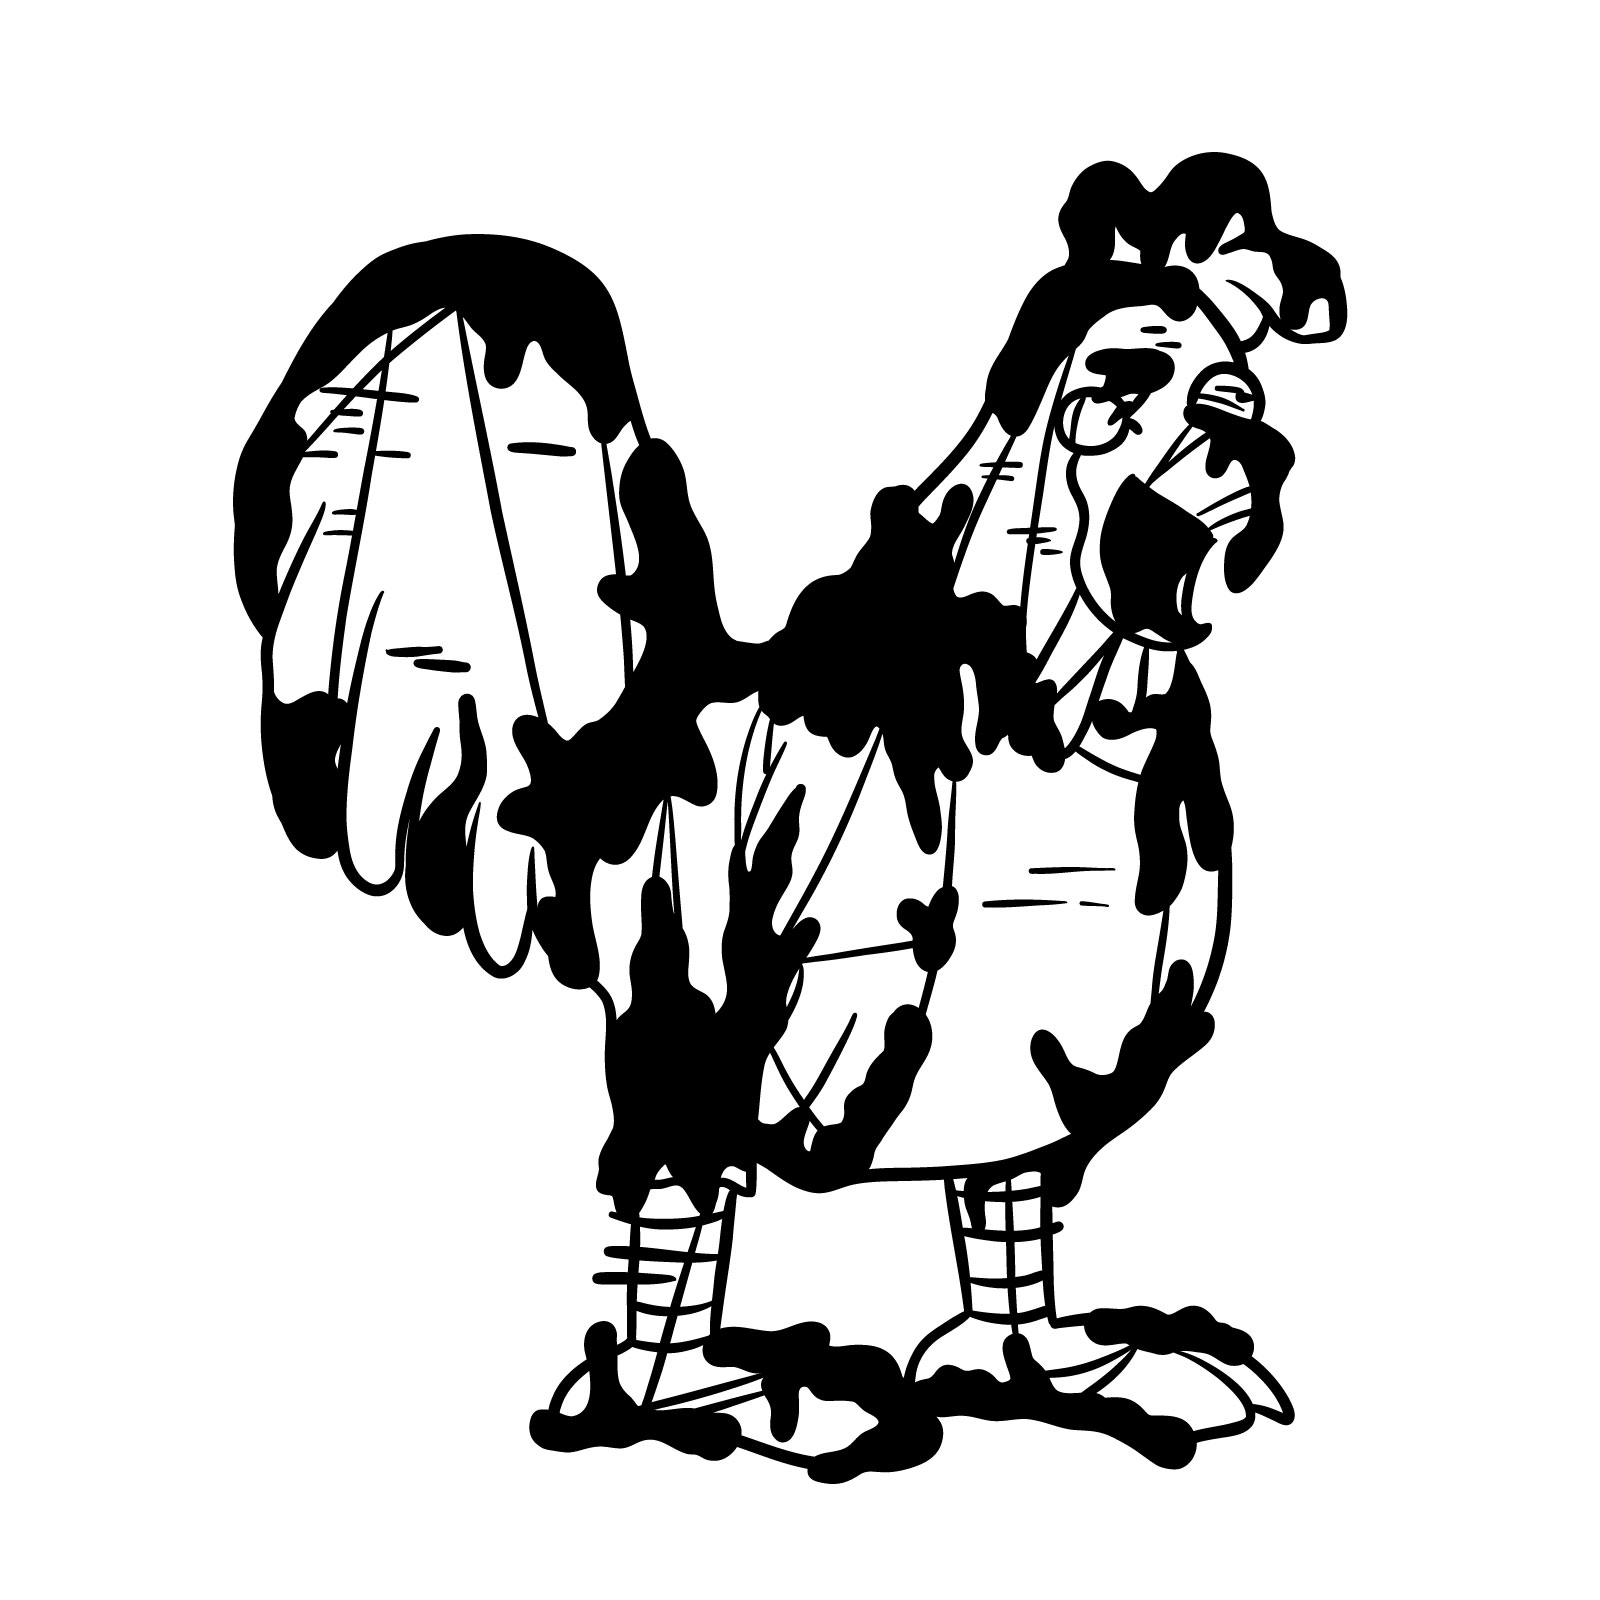 How to draw Corrupted Ernie the Chicken - final step